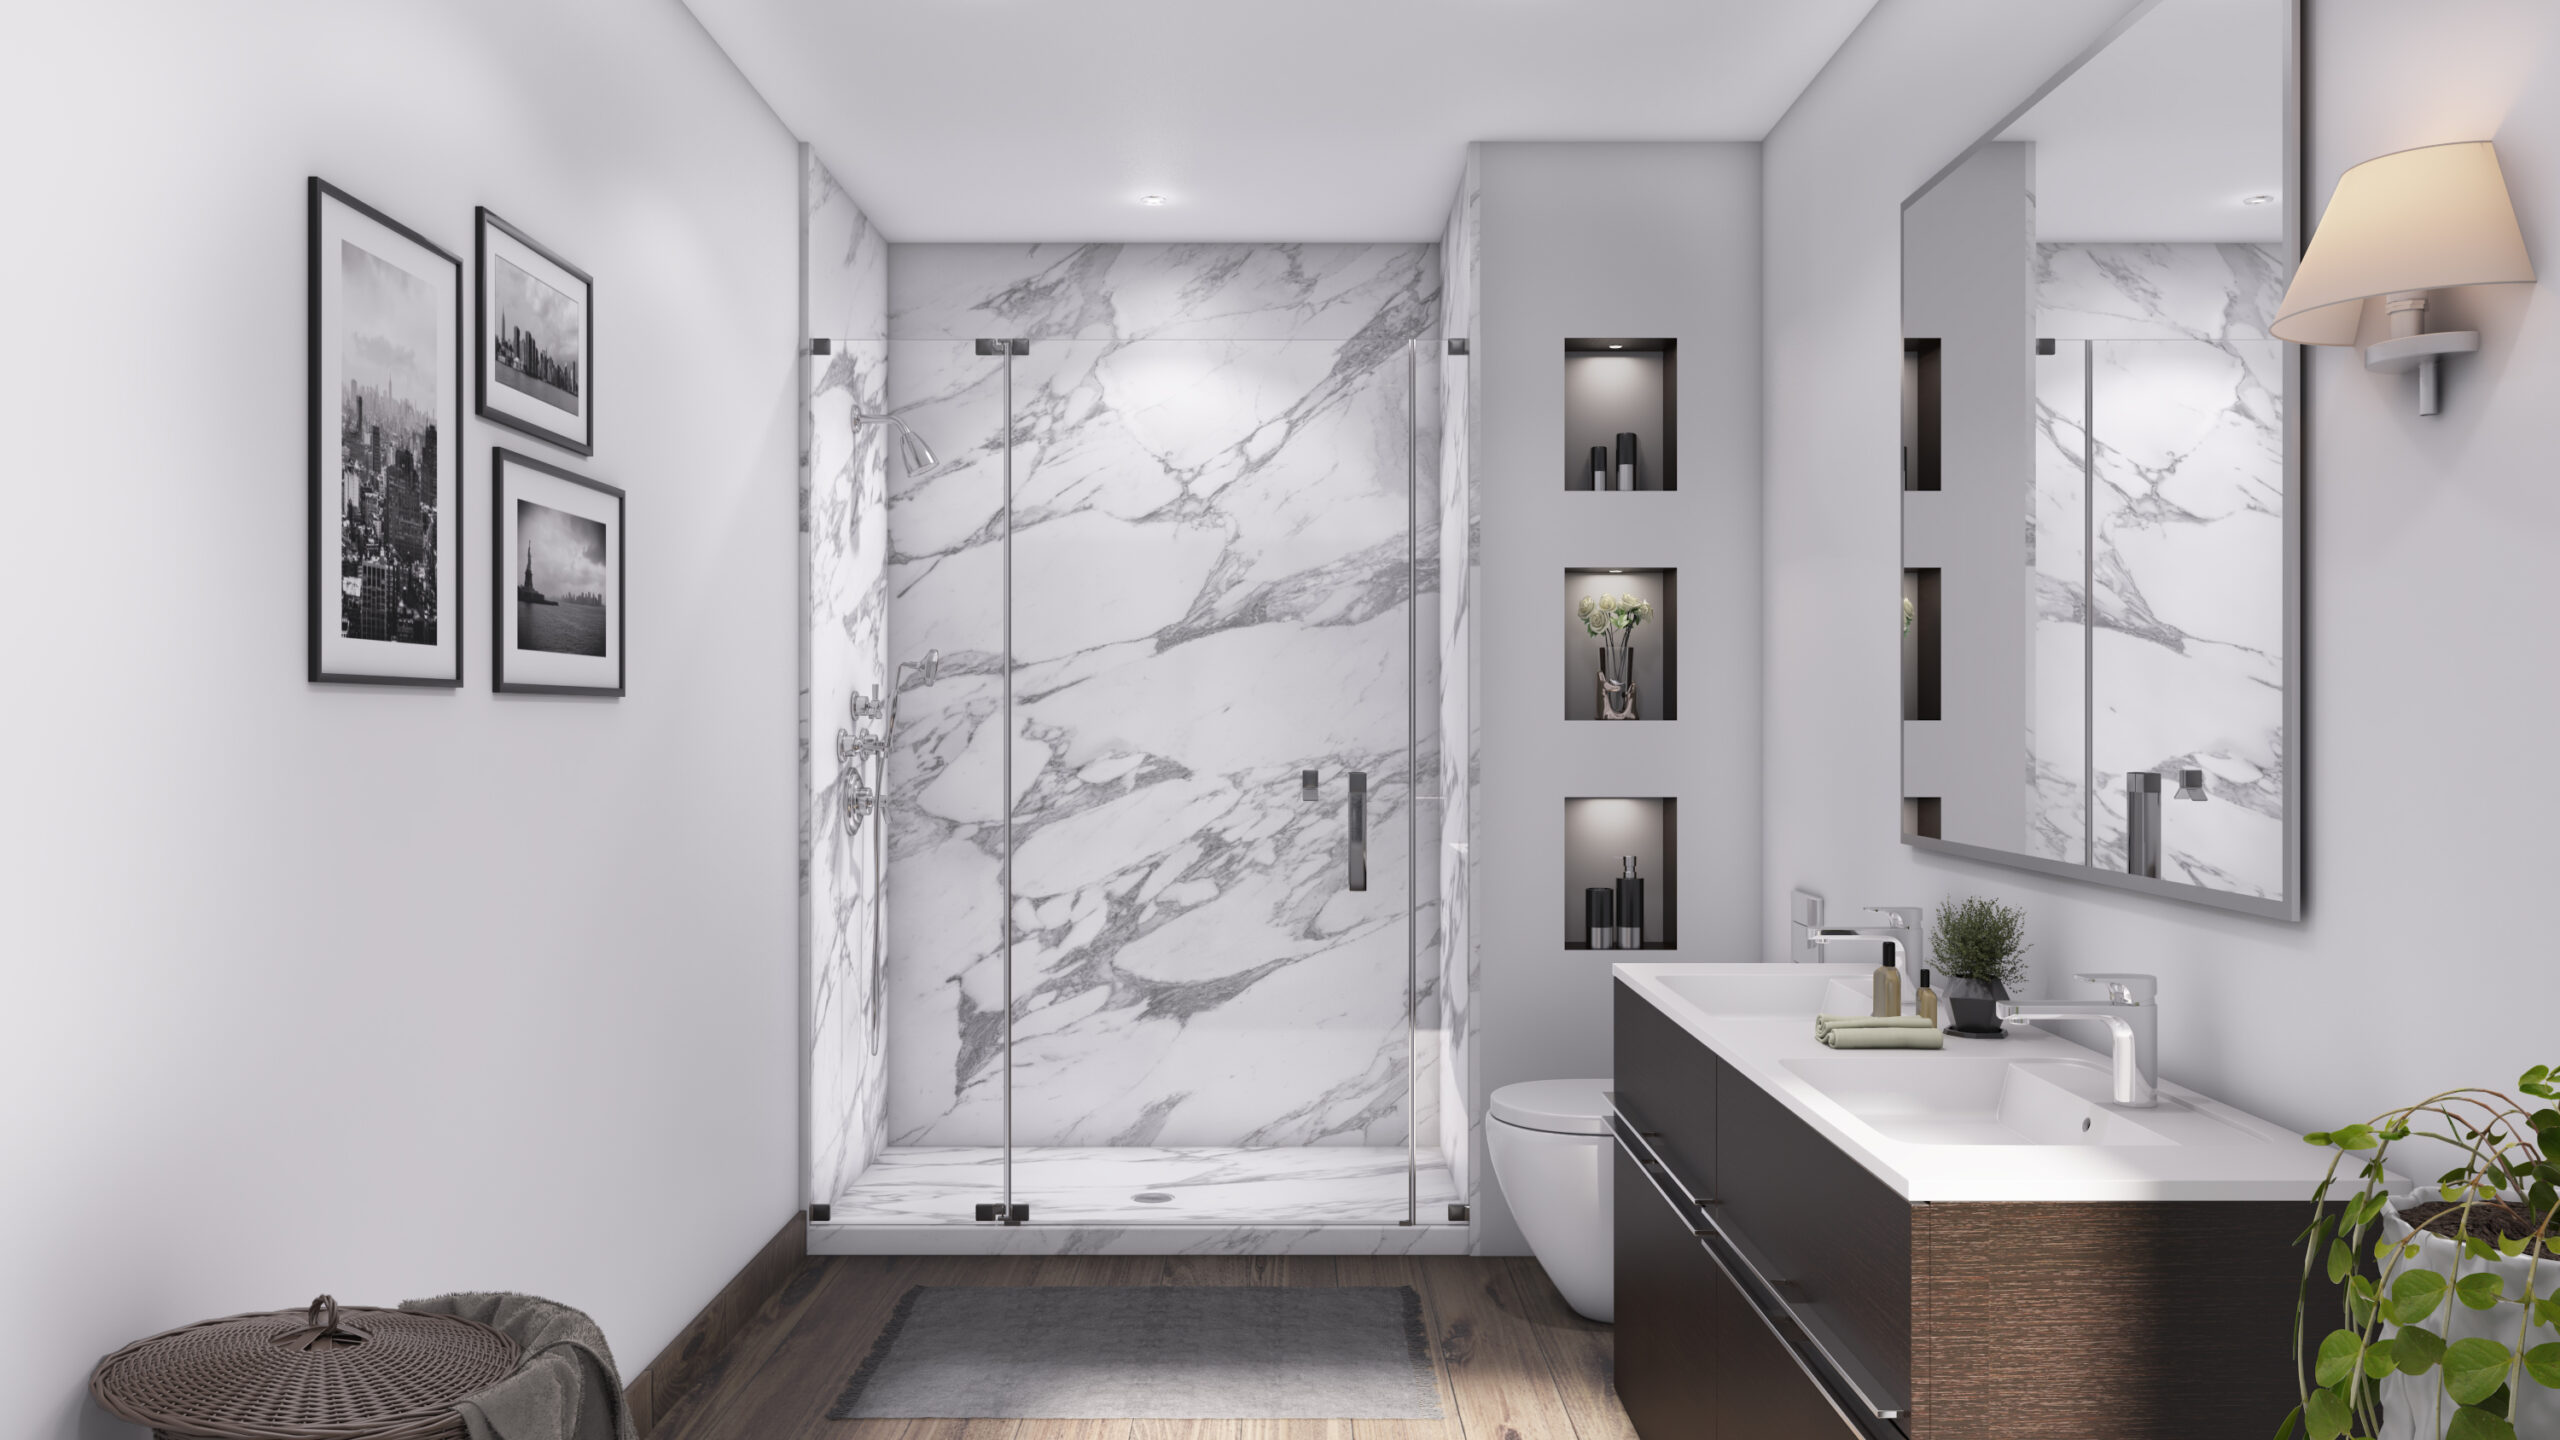 A modern bathroom with white walls and marble floors - bathroom remodeling and renovation from Oasis Bath Solutions of Kent Washington